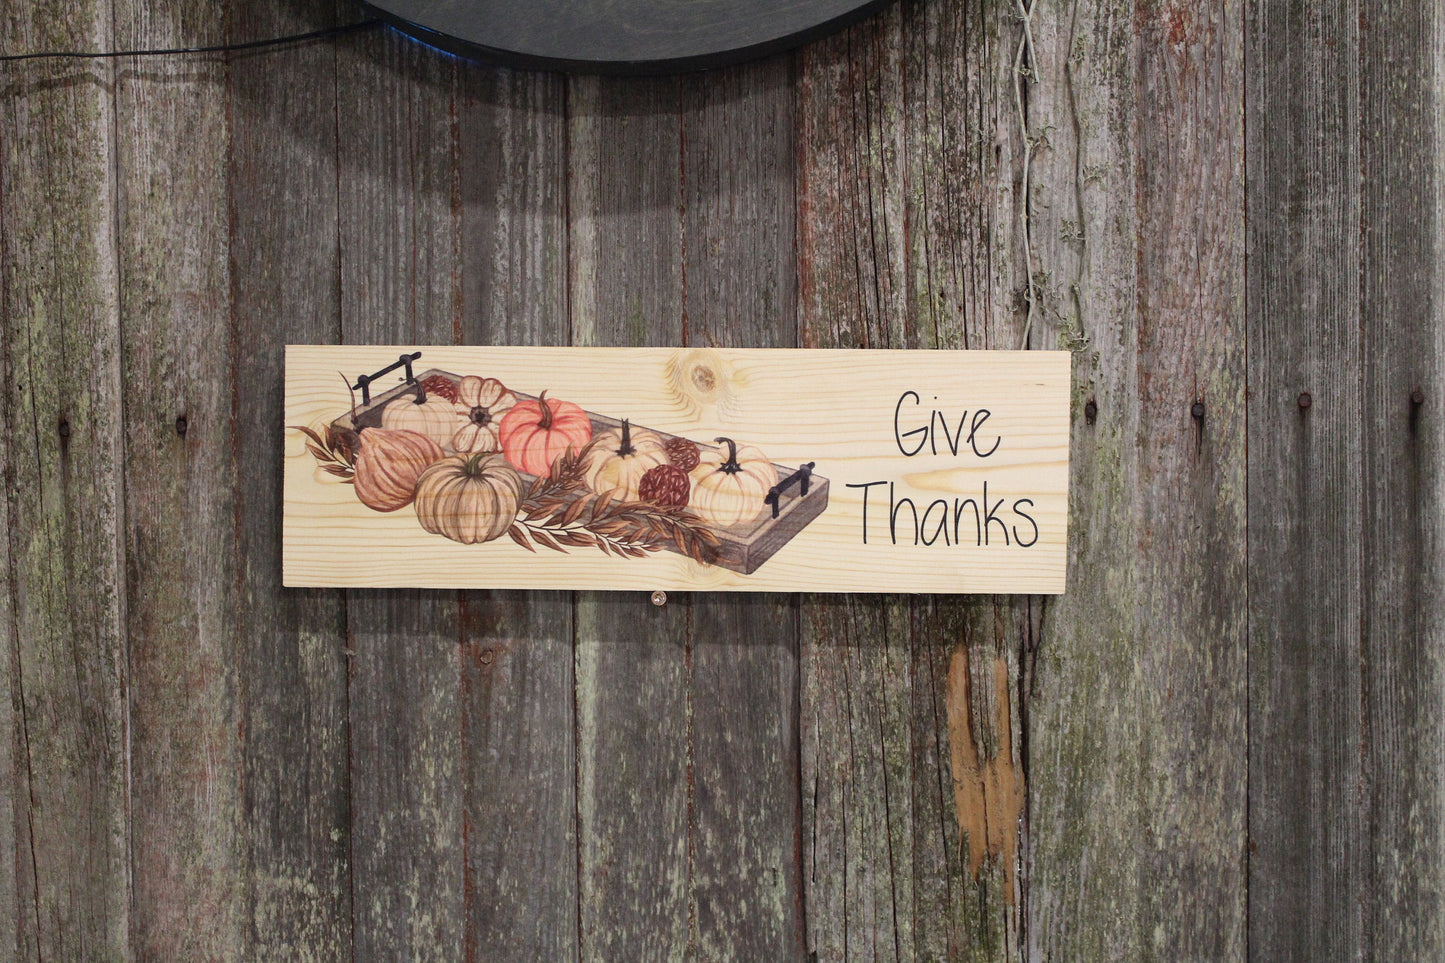 Give Thanks Pumpkin Tray Sign Wood White Orange Gourd Thanksgiving Pinecone Fall Autumn Halloween Rustic Country Decoration Wall Decor